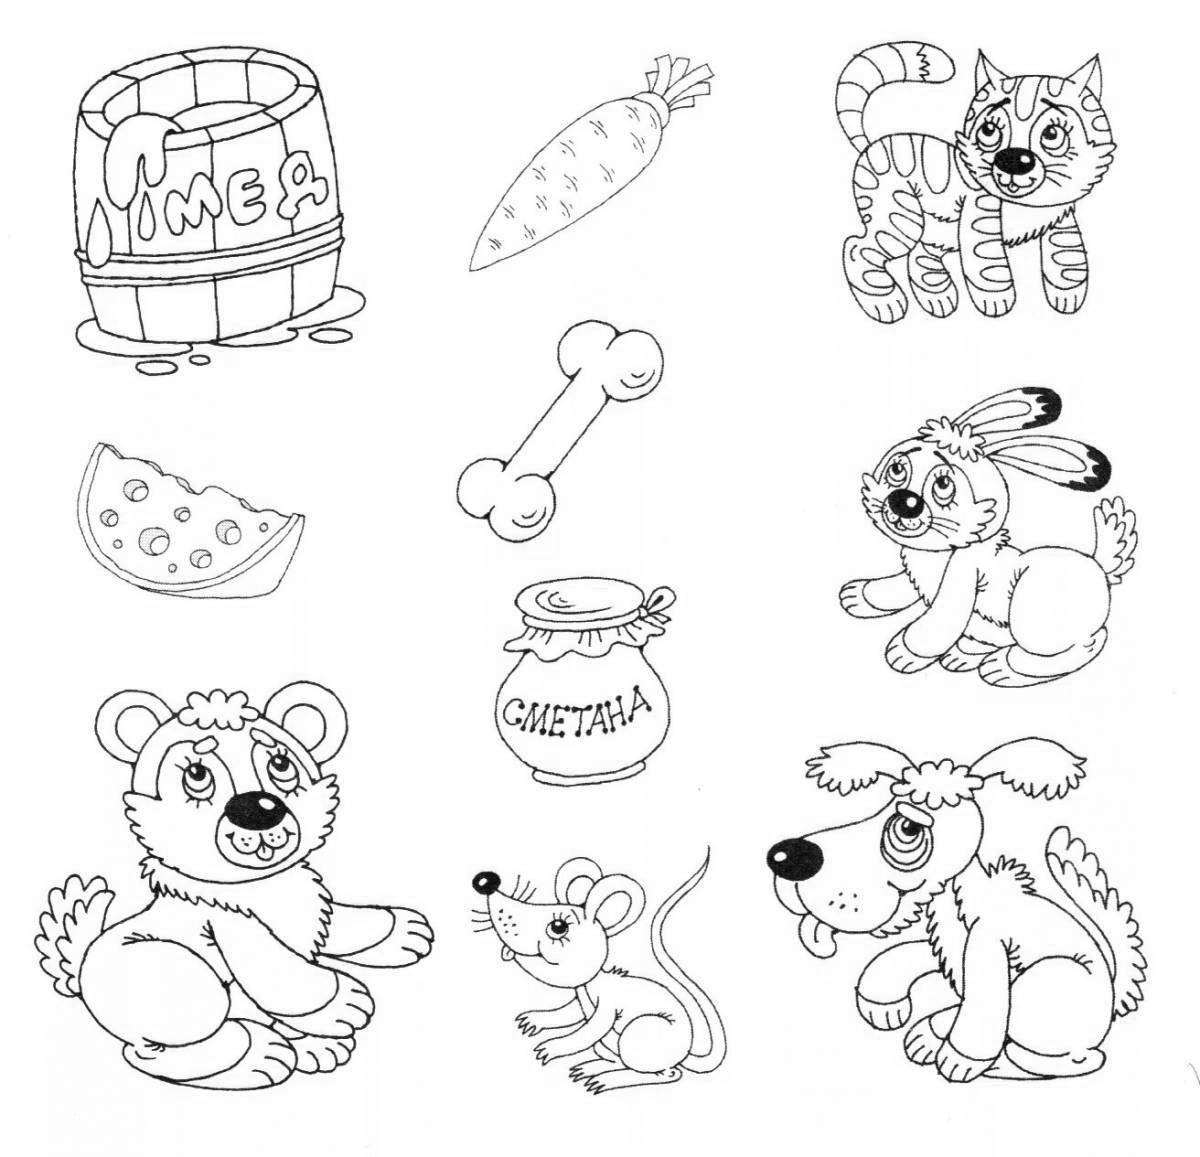 Whimsical coloring book for kids 3-4 years old